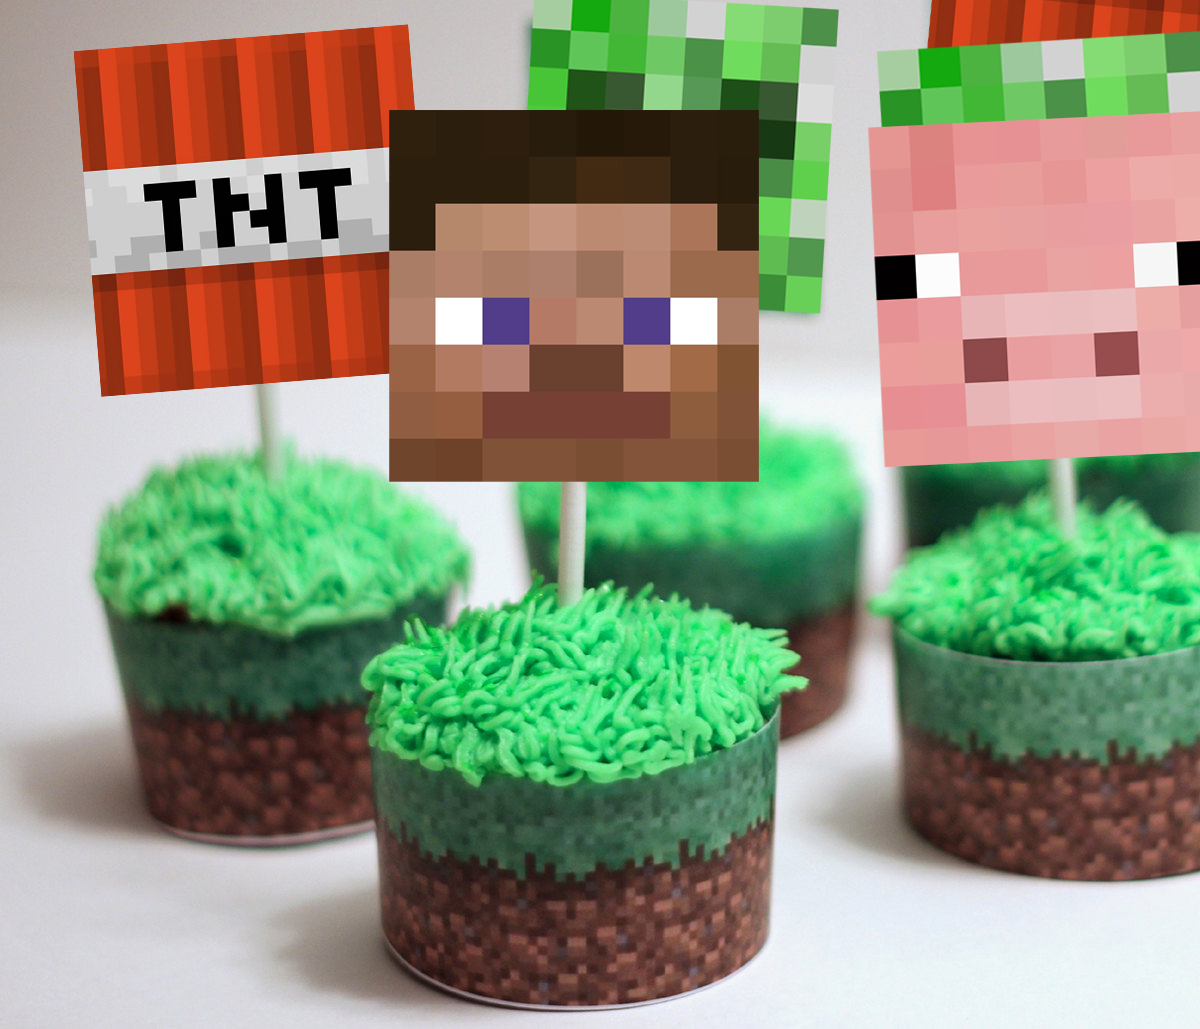 http://www.magicalprintable.com/wp-content/uploads/edd/2015/04/Minecraft-Cupcake-Wrappers-Minecraft-Party-Instant-Download-Printable.jpg